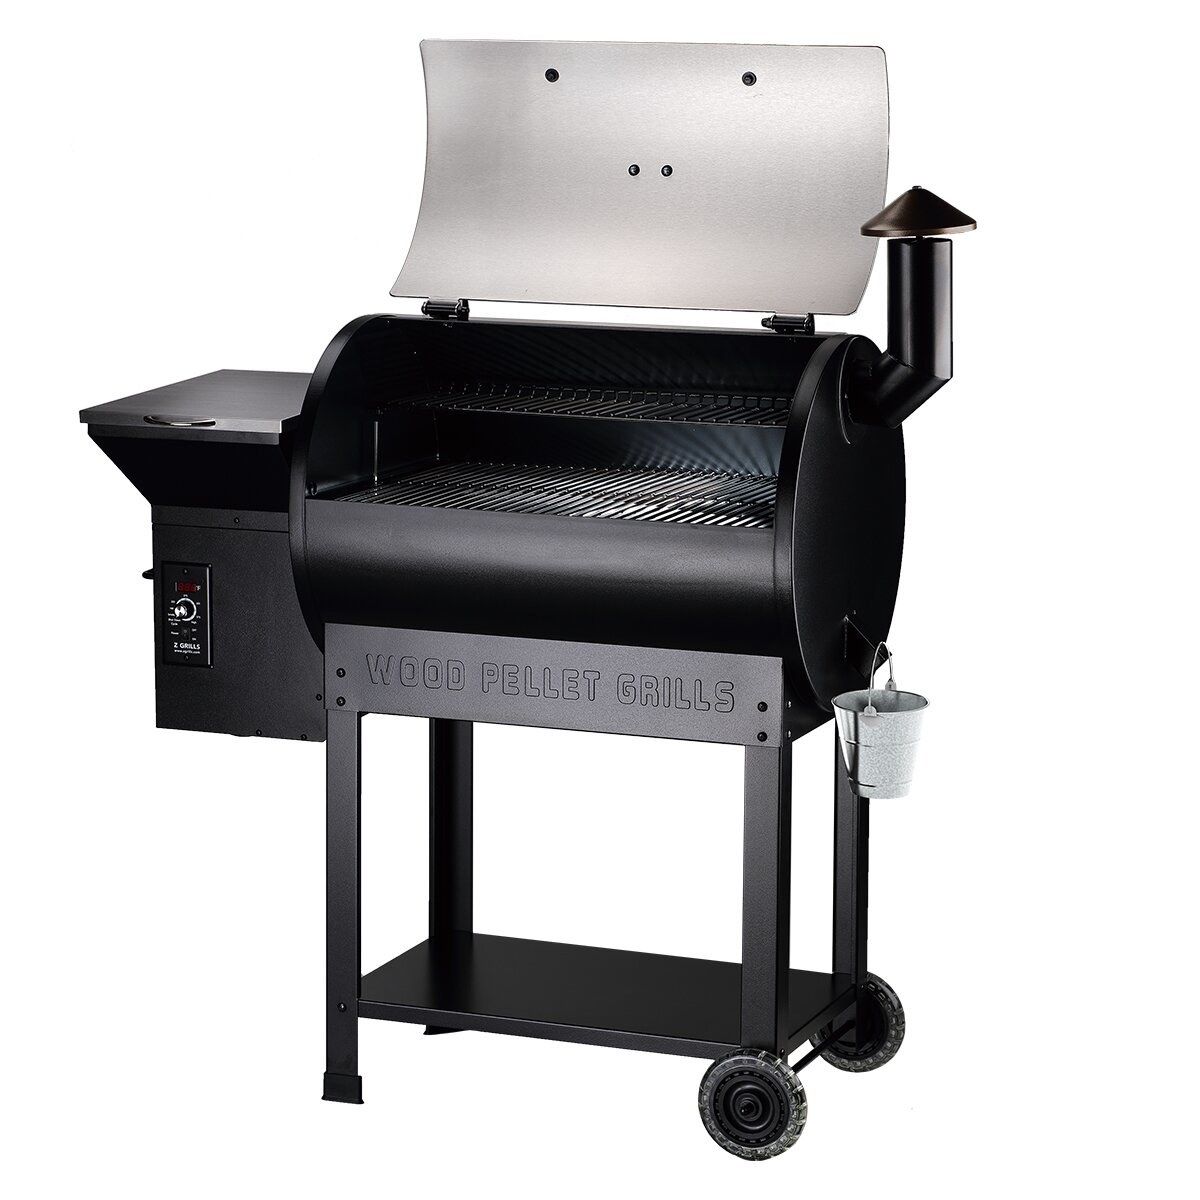 the black and silver grill